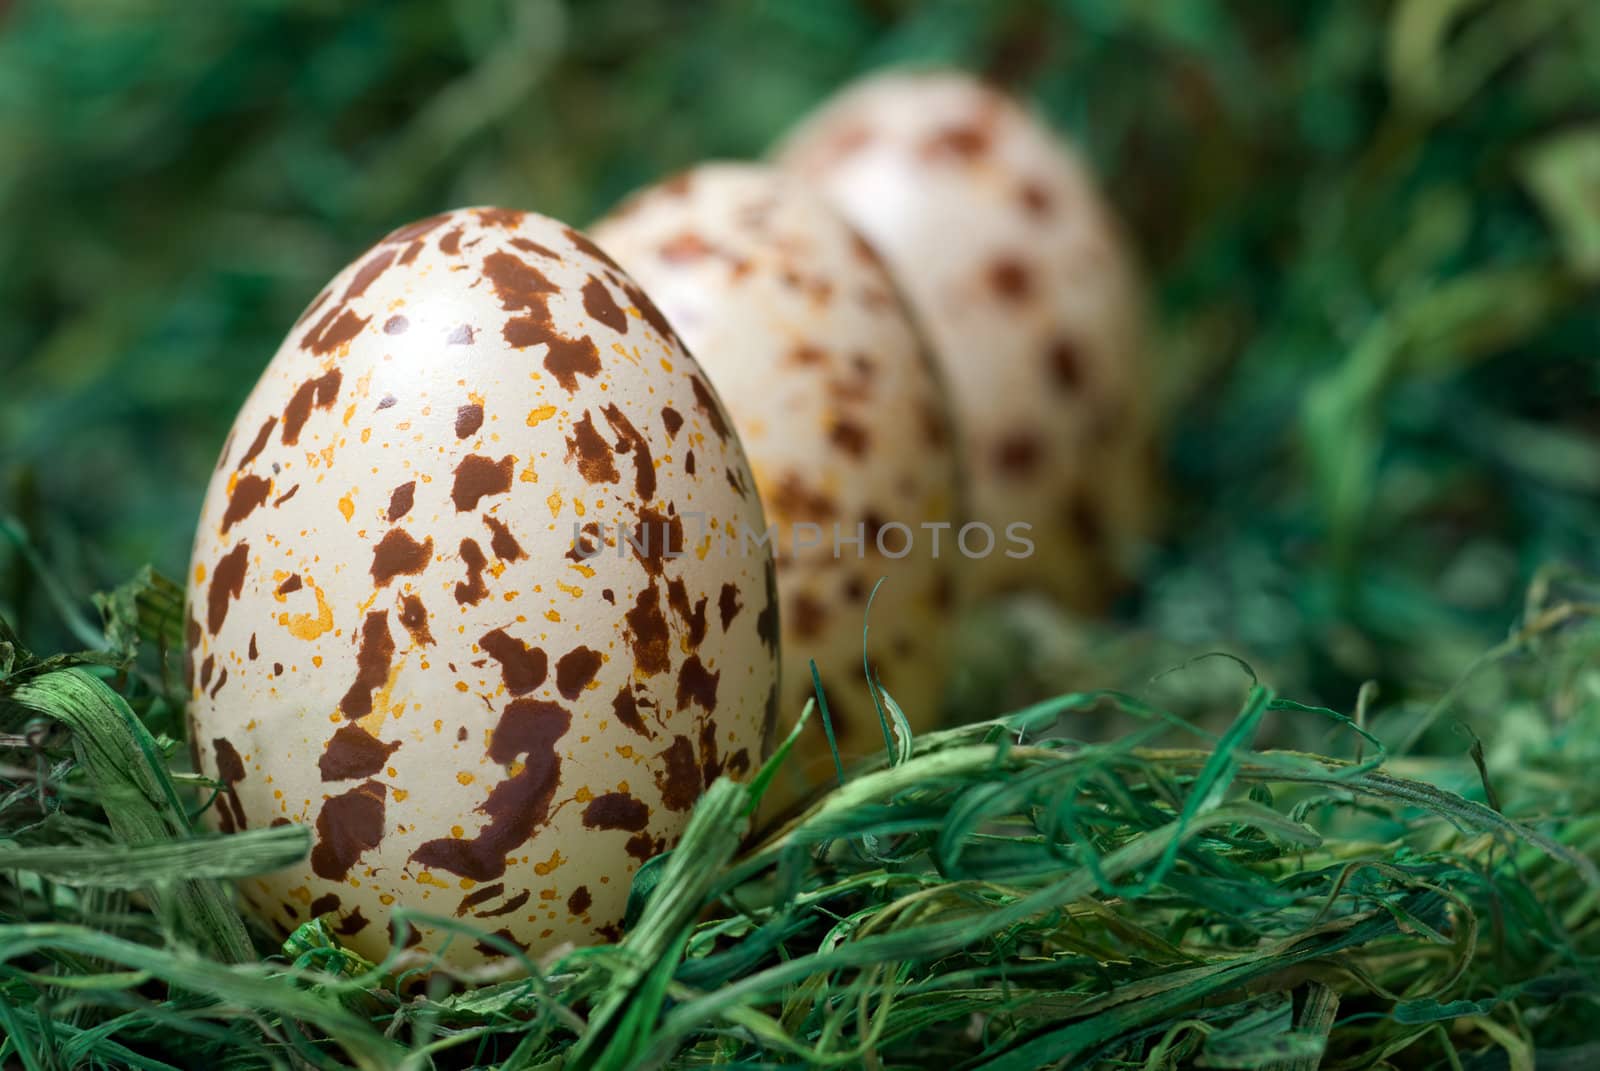 Three spotted eggs on the green hay. Selective focus, shallow depth of field.